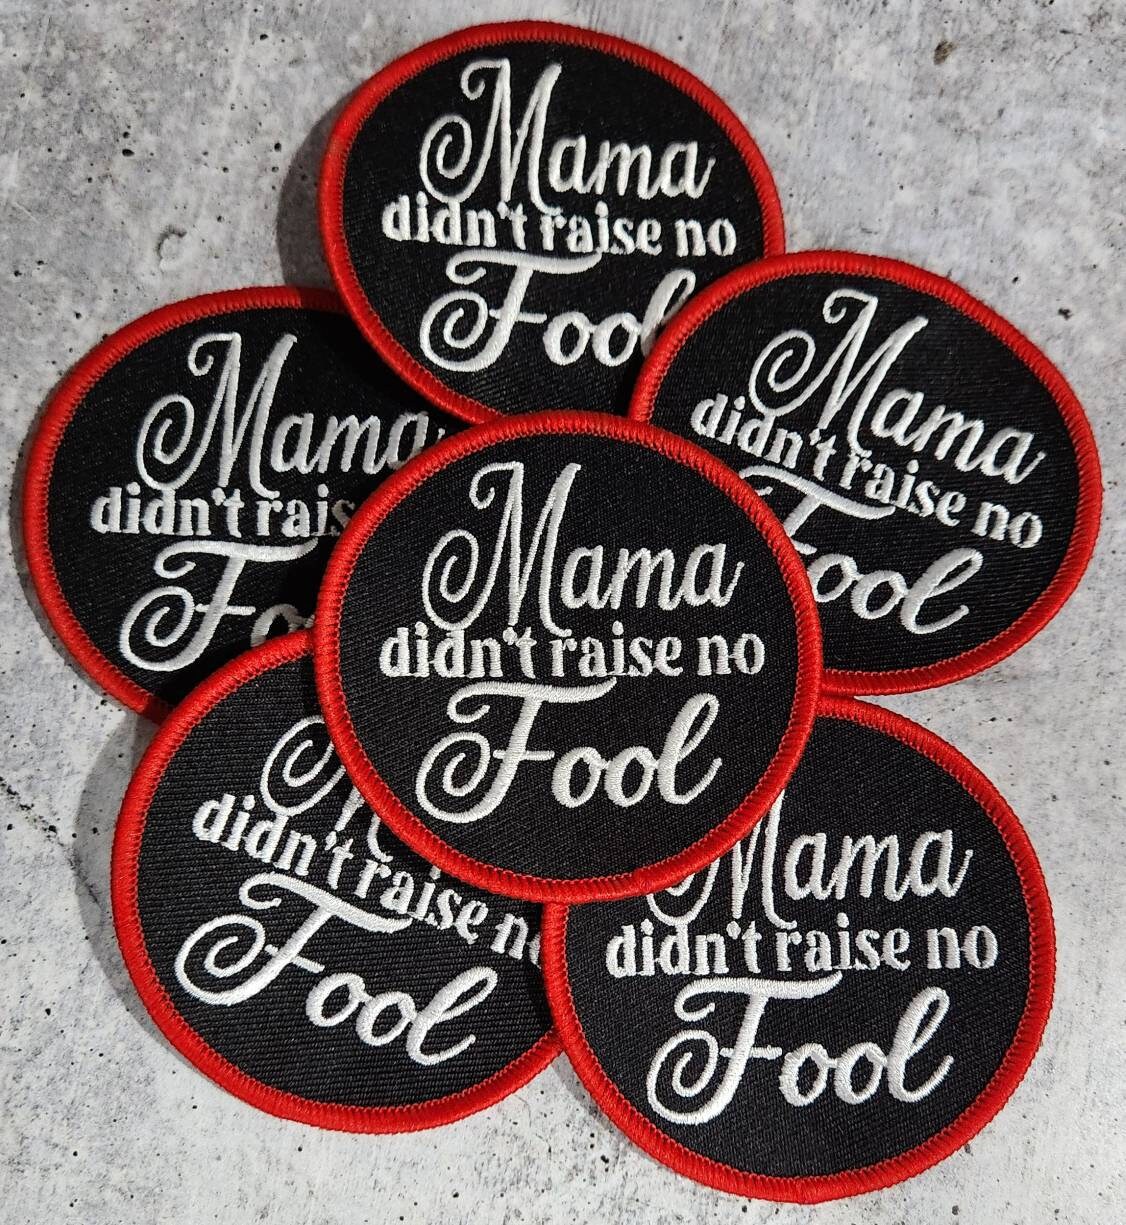 NEW, 1-pc, "Mama Didn't Raise No Fool" Iron-on Patch for Denim Jackets, Hats, Crocs, Bags, Embroidery Art Patch, Sz 3"x3", The Best Patches